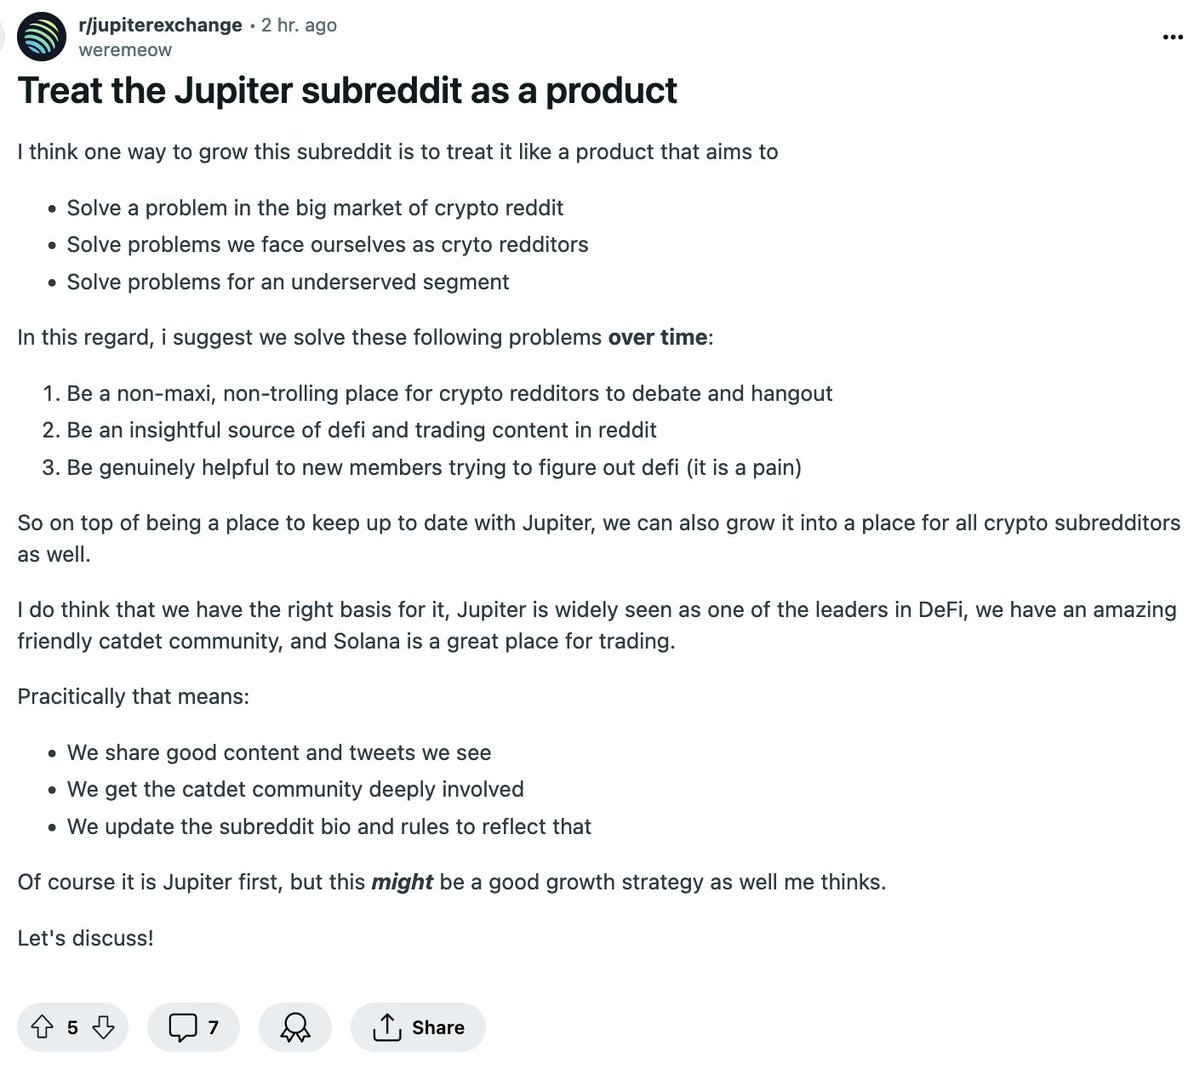 My suggestion for the baby Jupiter subreddit: Treat it like a product for the wider crypto reddit community and solve some longstanding problems for them! reddit.com/r/jupiterexcha…